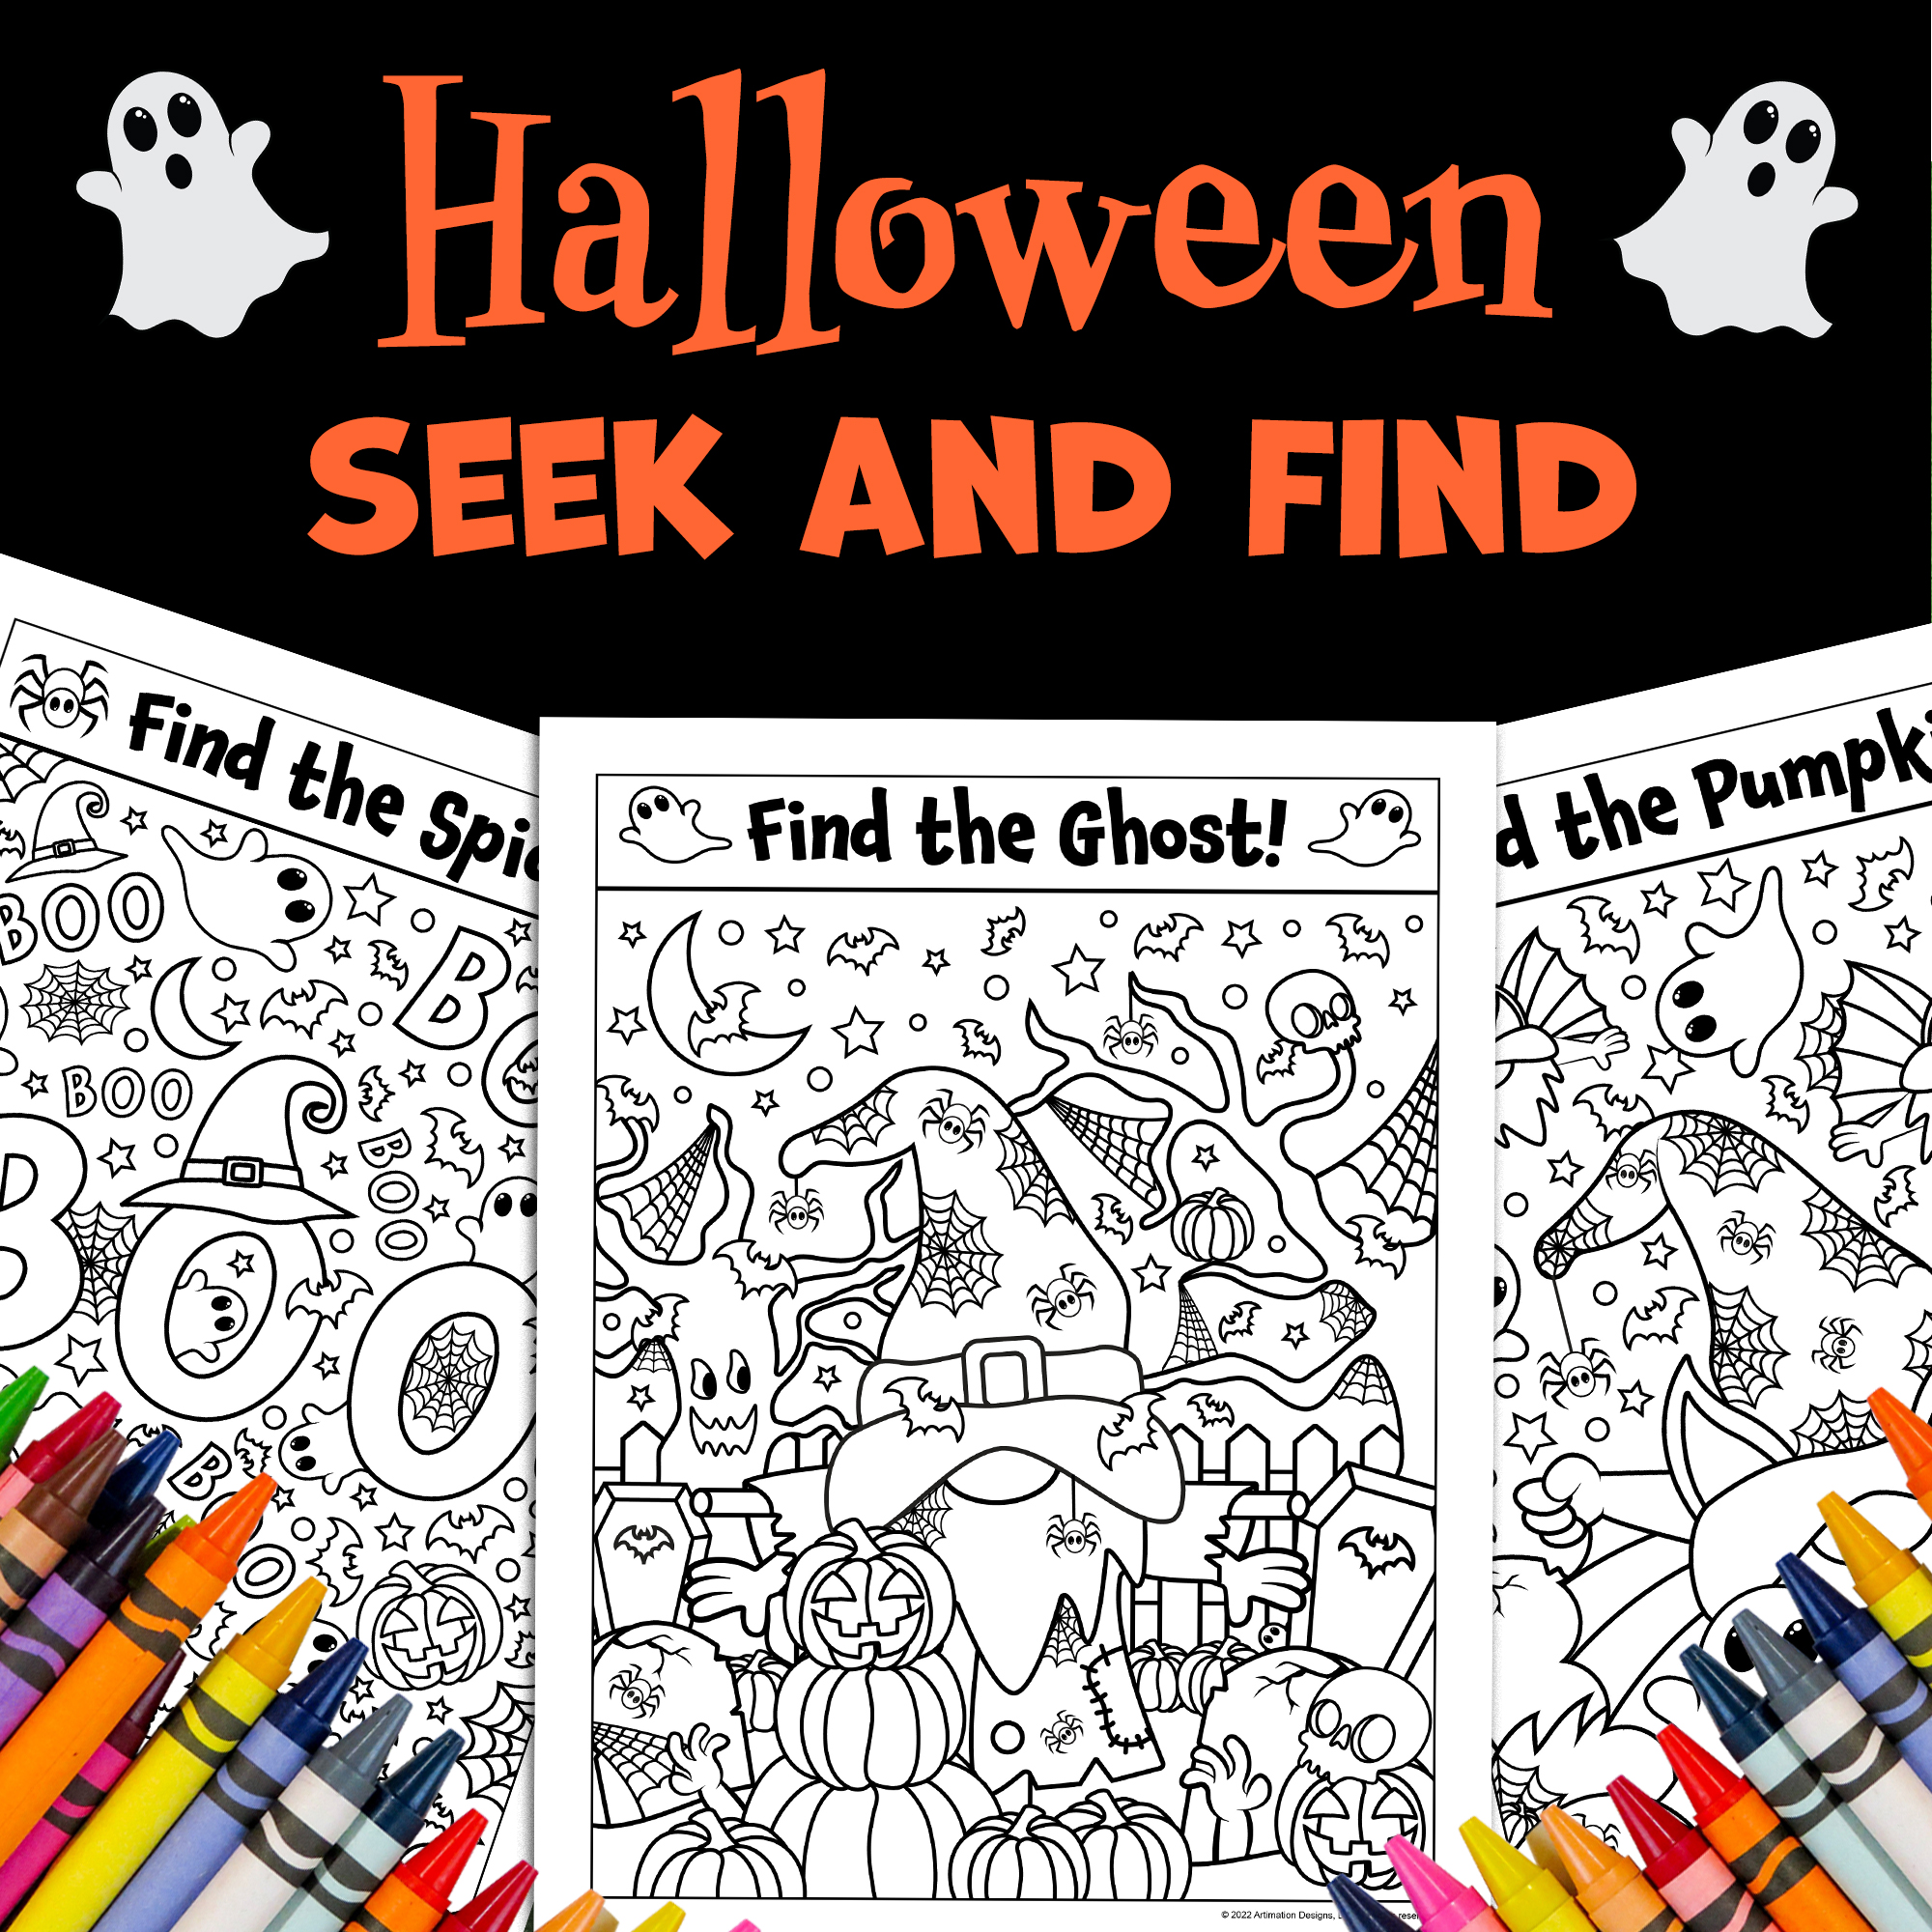 Halloween coloring pages seek and find hidden objects i spy fall made by teachers